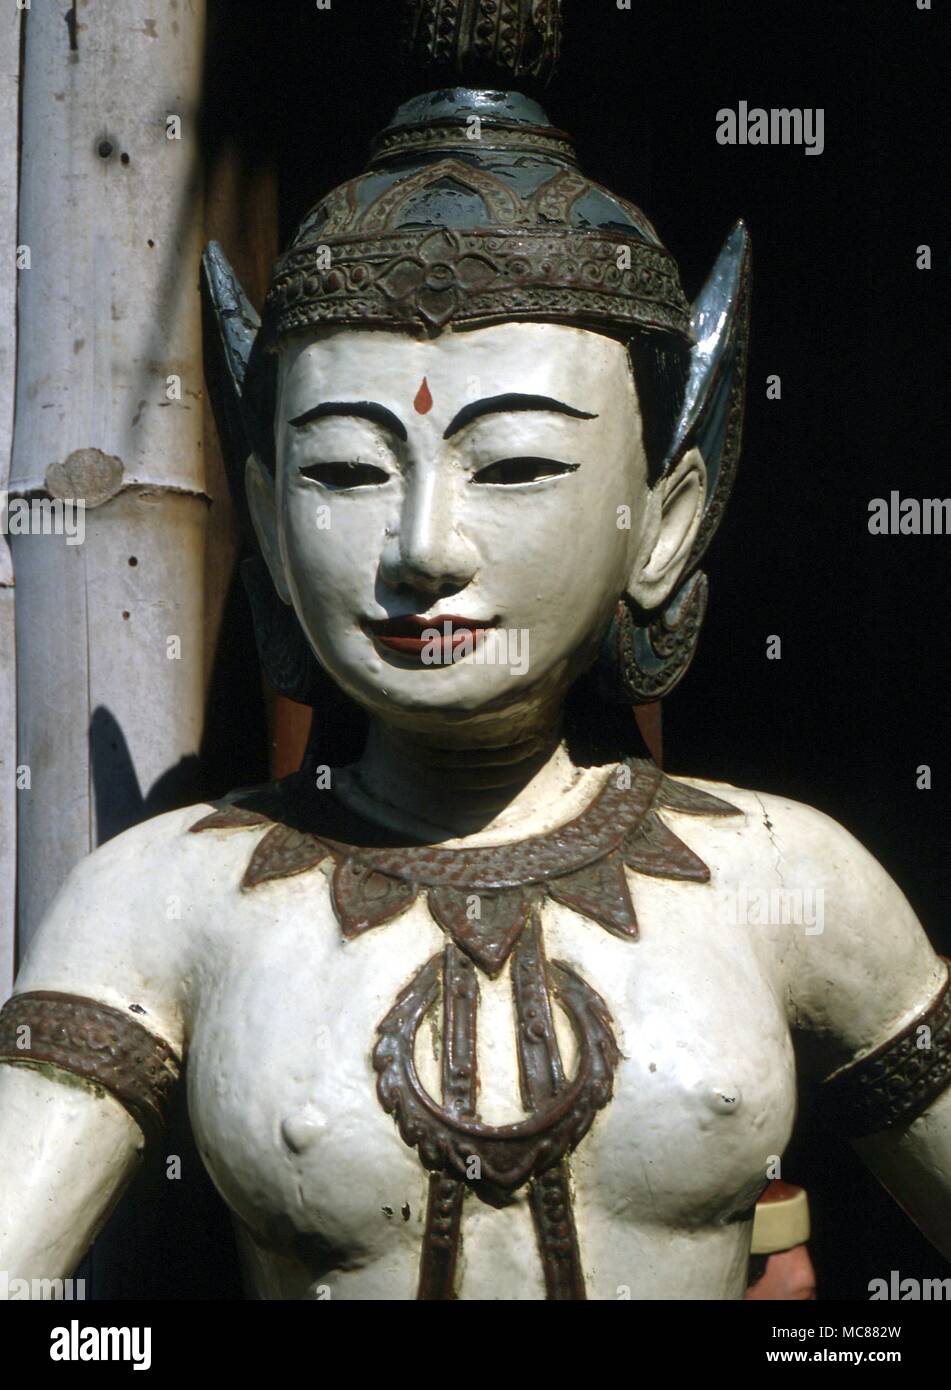 A Tai Kummara. Nineteenth century wood carving in private collection. Stock Photo